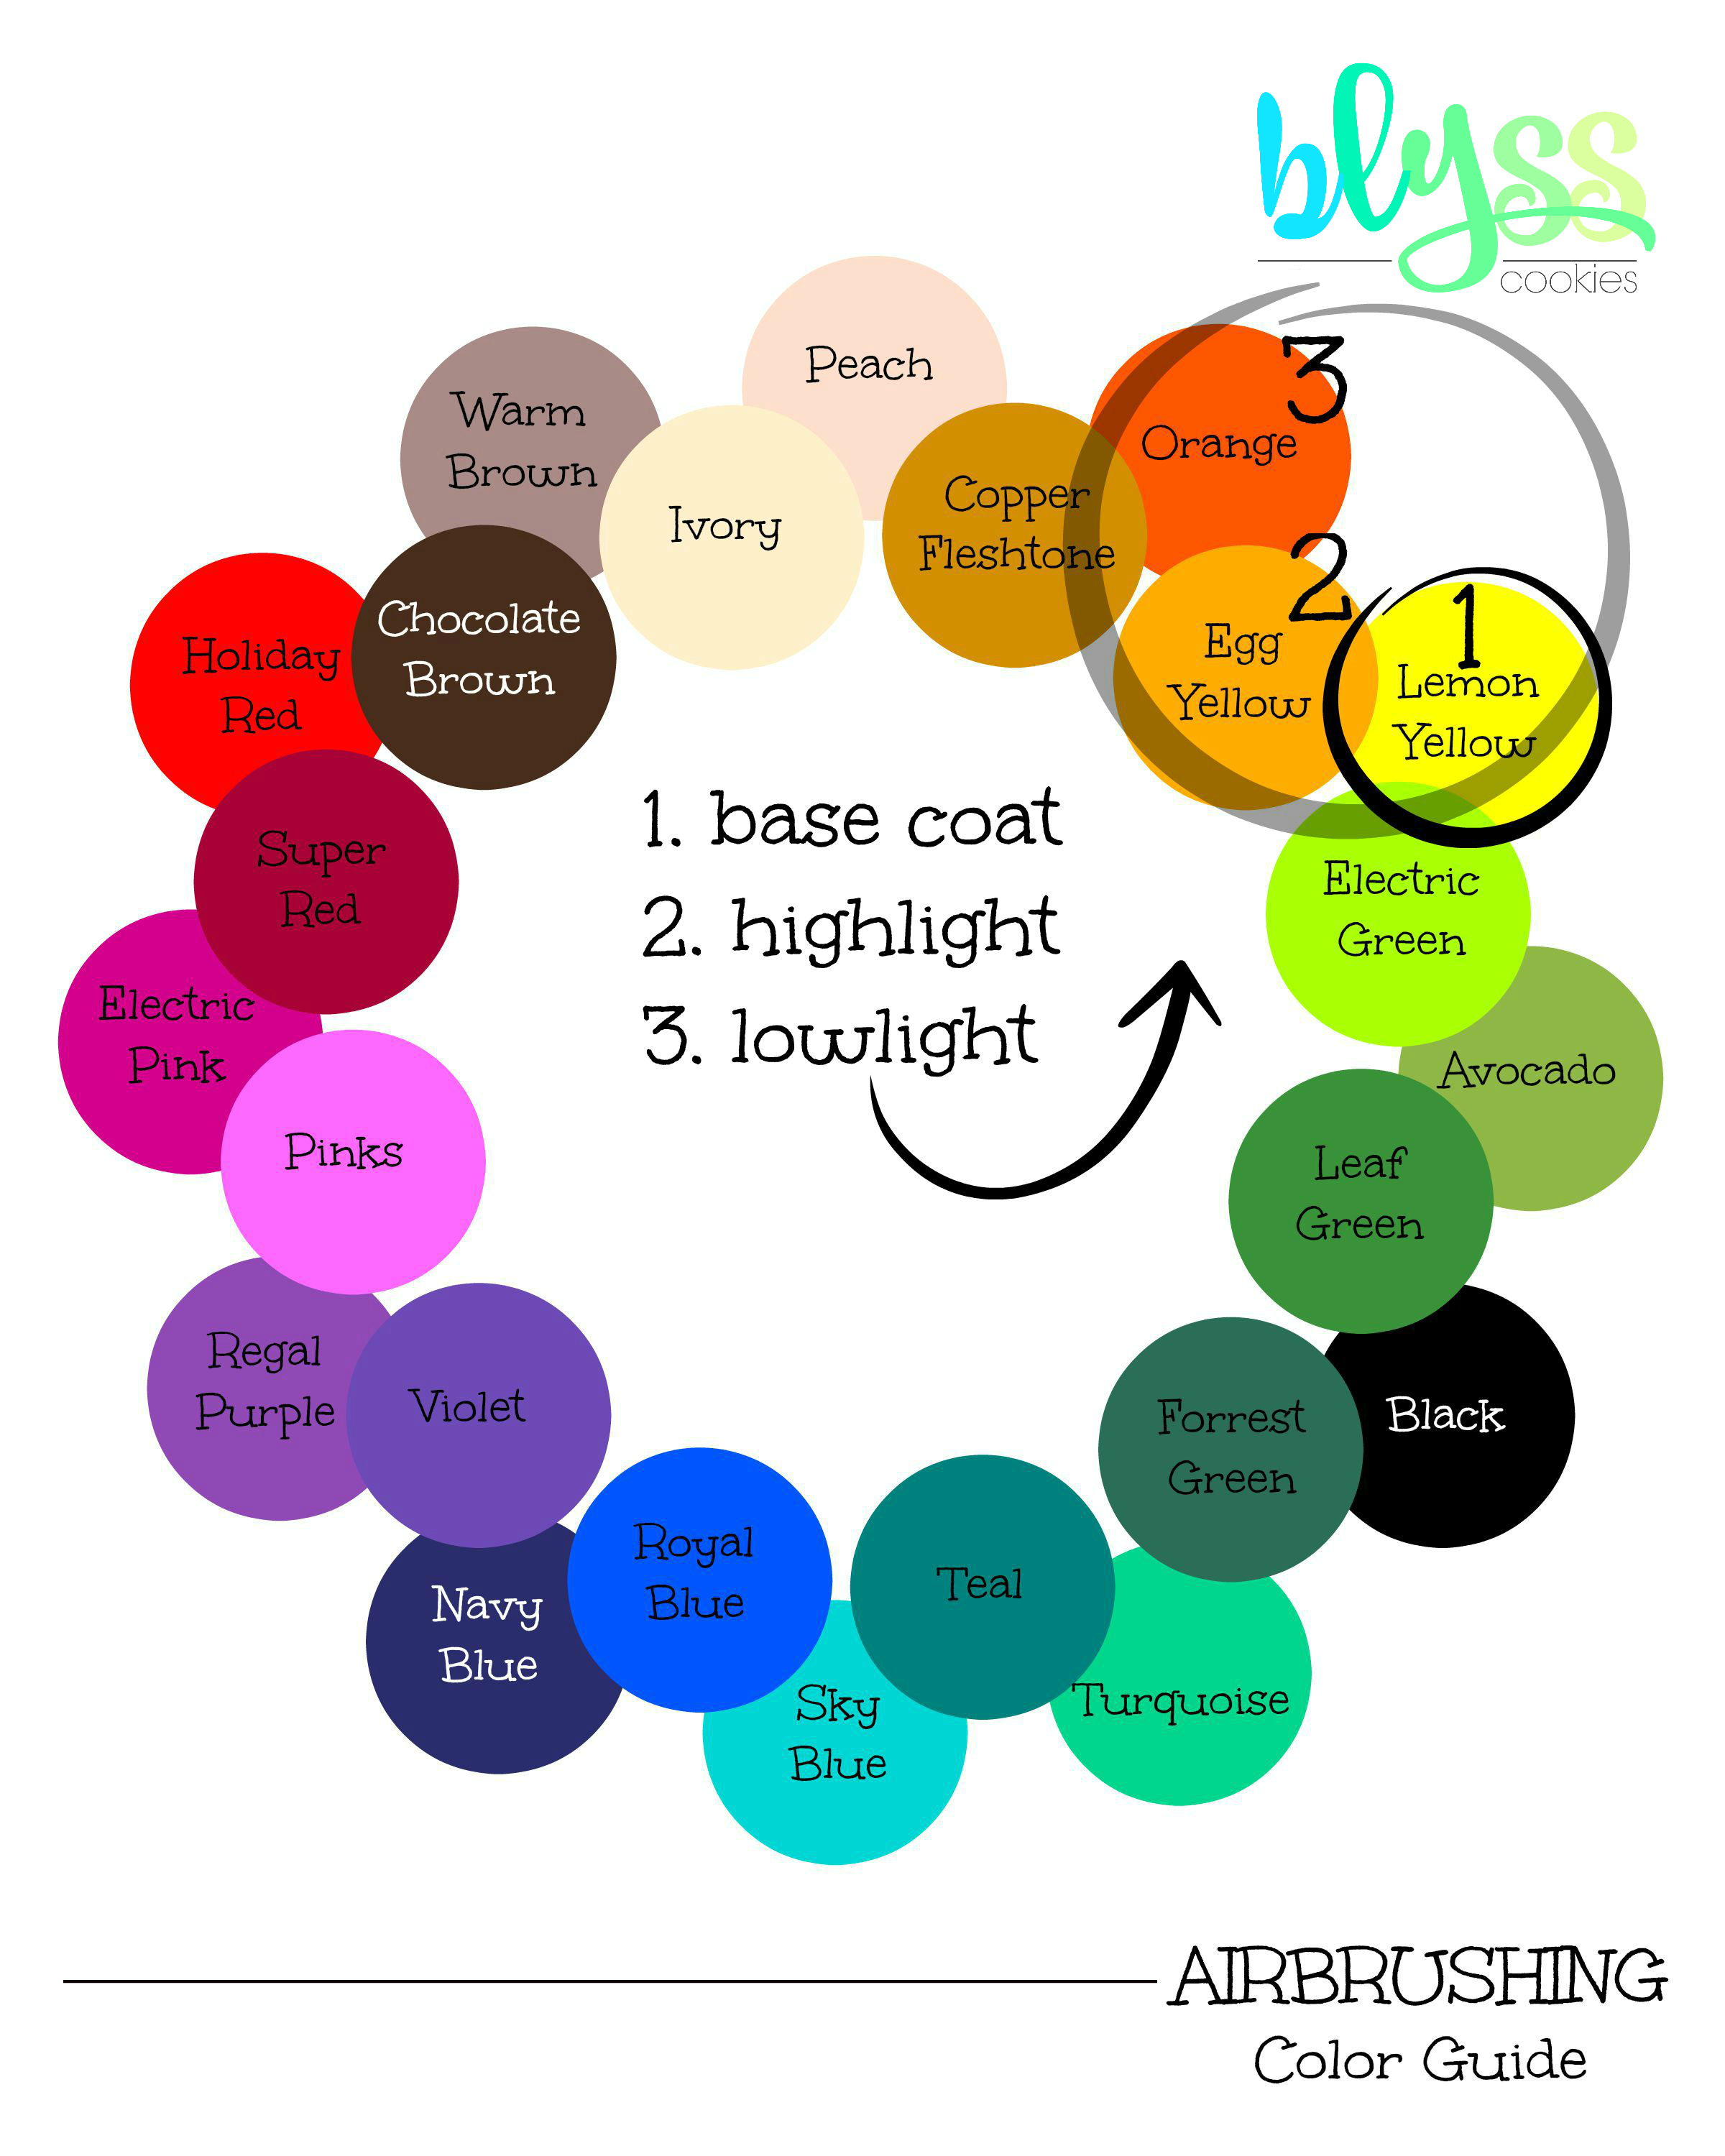 Airbrushing Color Guide4.jpg